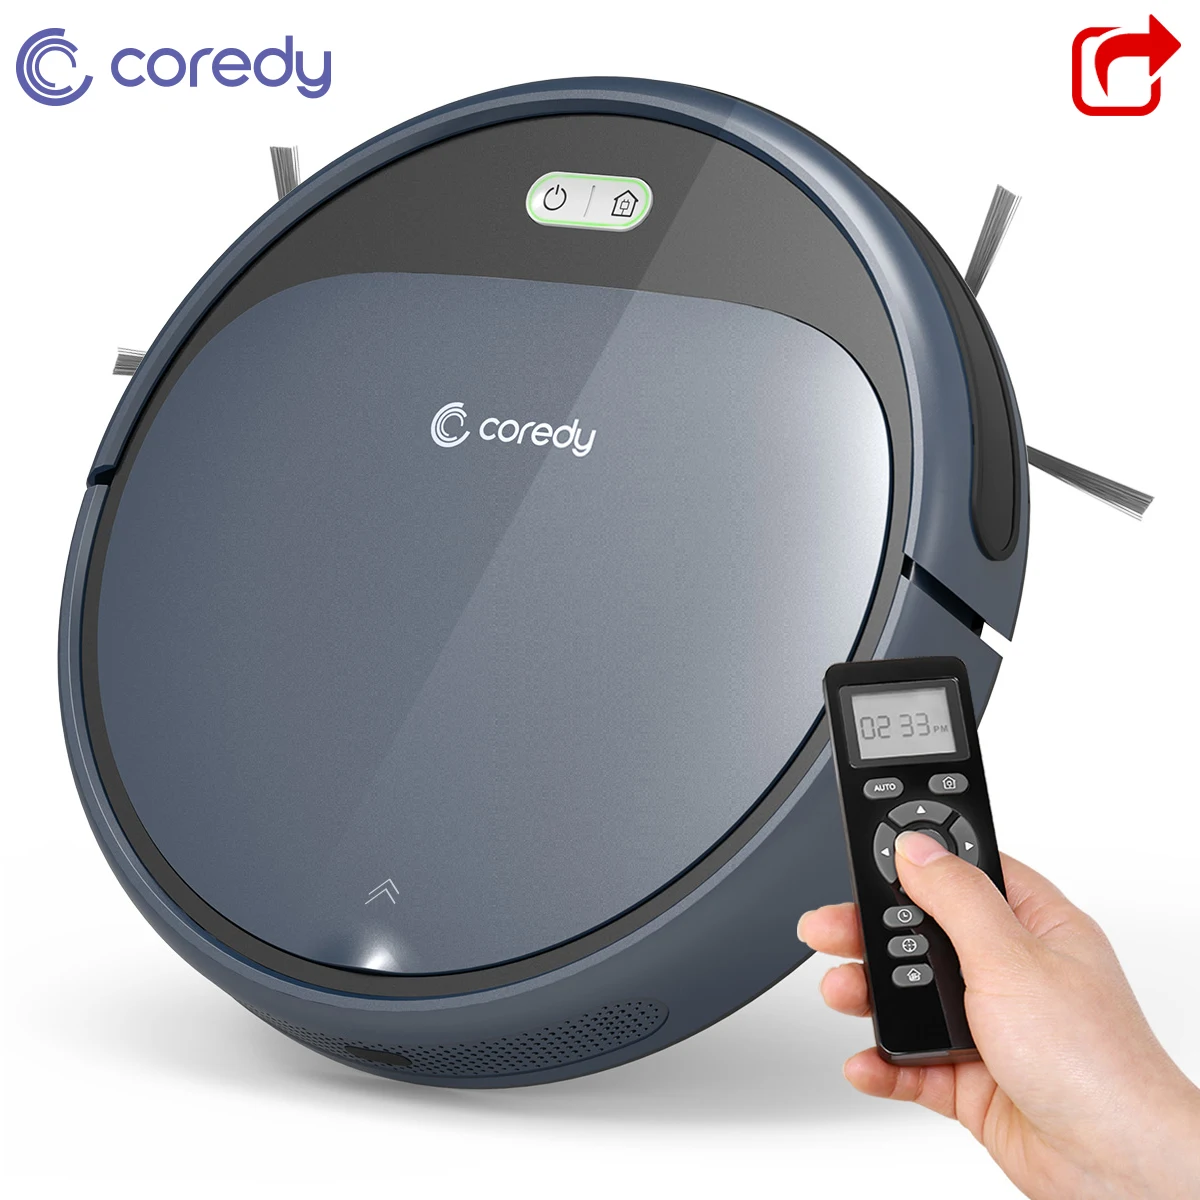 Coredy R300 1400PA Clean Robot Vacuum cleaner Automatic ...